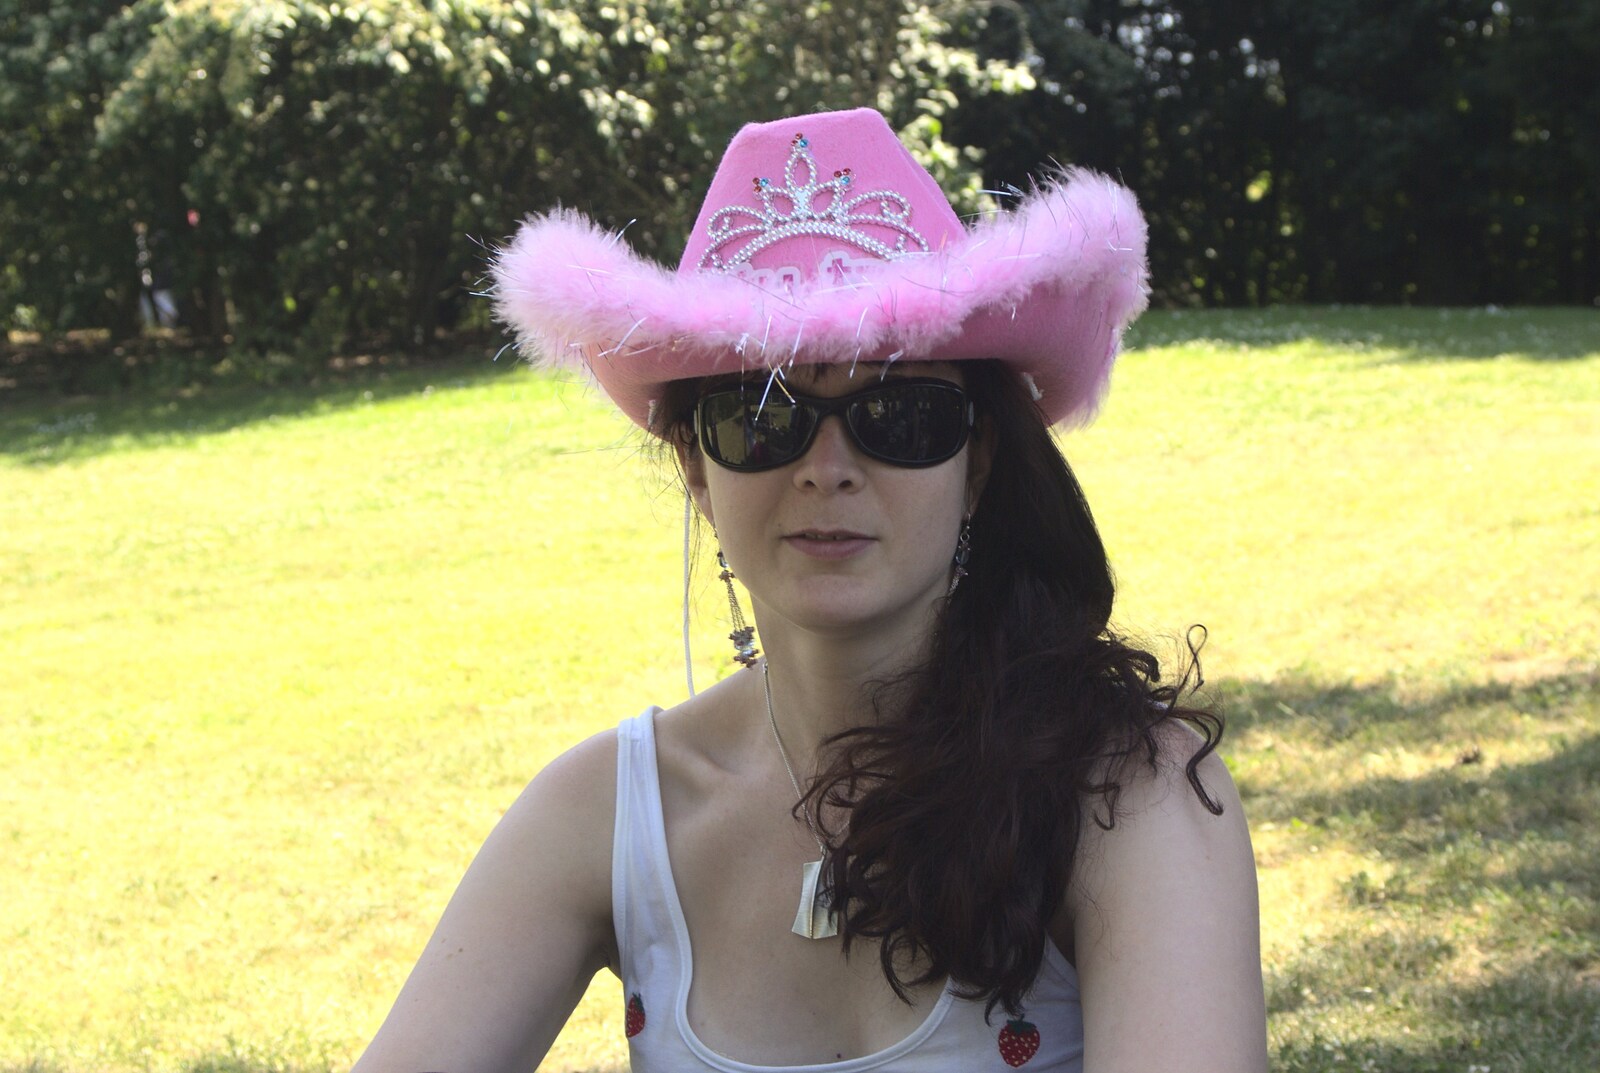 A Taptu Science Park Picnic, and Wedding Guests Arrive, Cambridge and Brome, Suffolk - 1st July 2010: Celia wears a pink cowboy hat